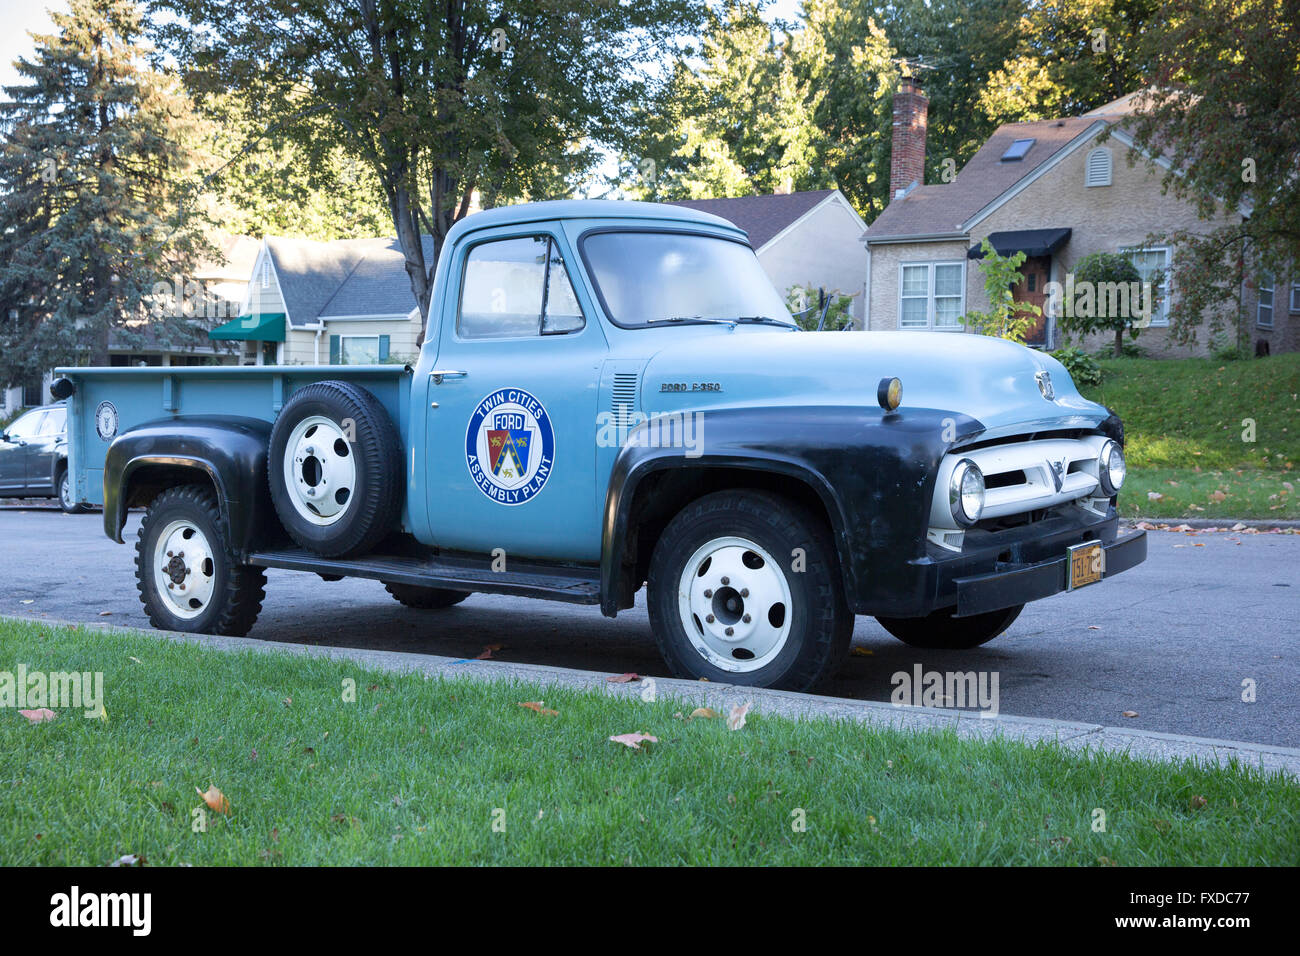 A classic 1953 Ford F-350 pickup truck with a Twin Cities Ford Assembly Plant decal on the side Stock Photo